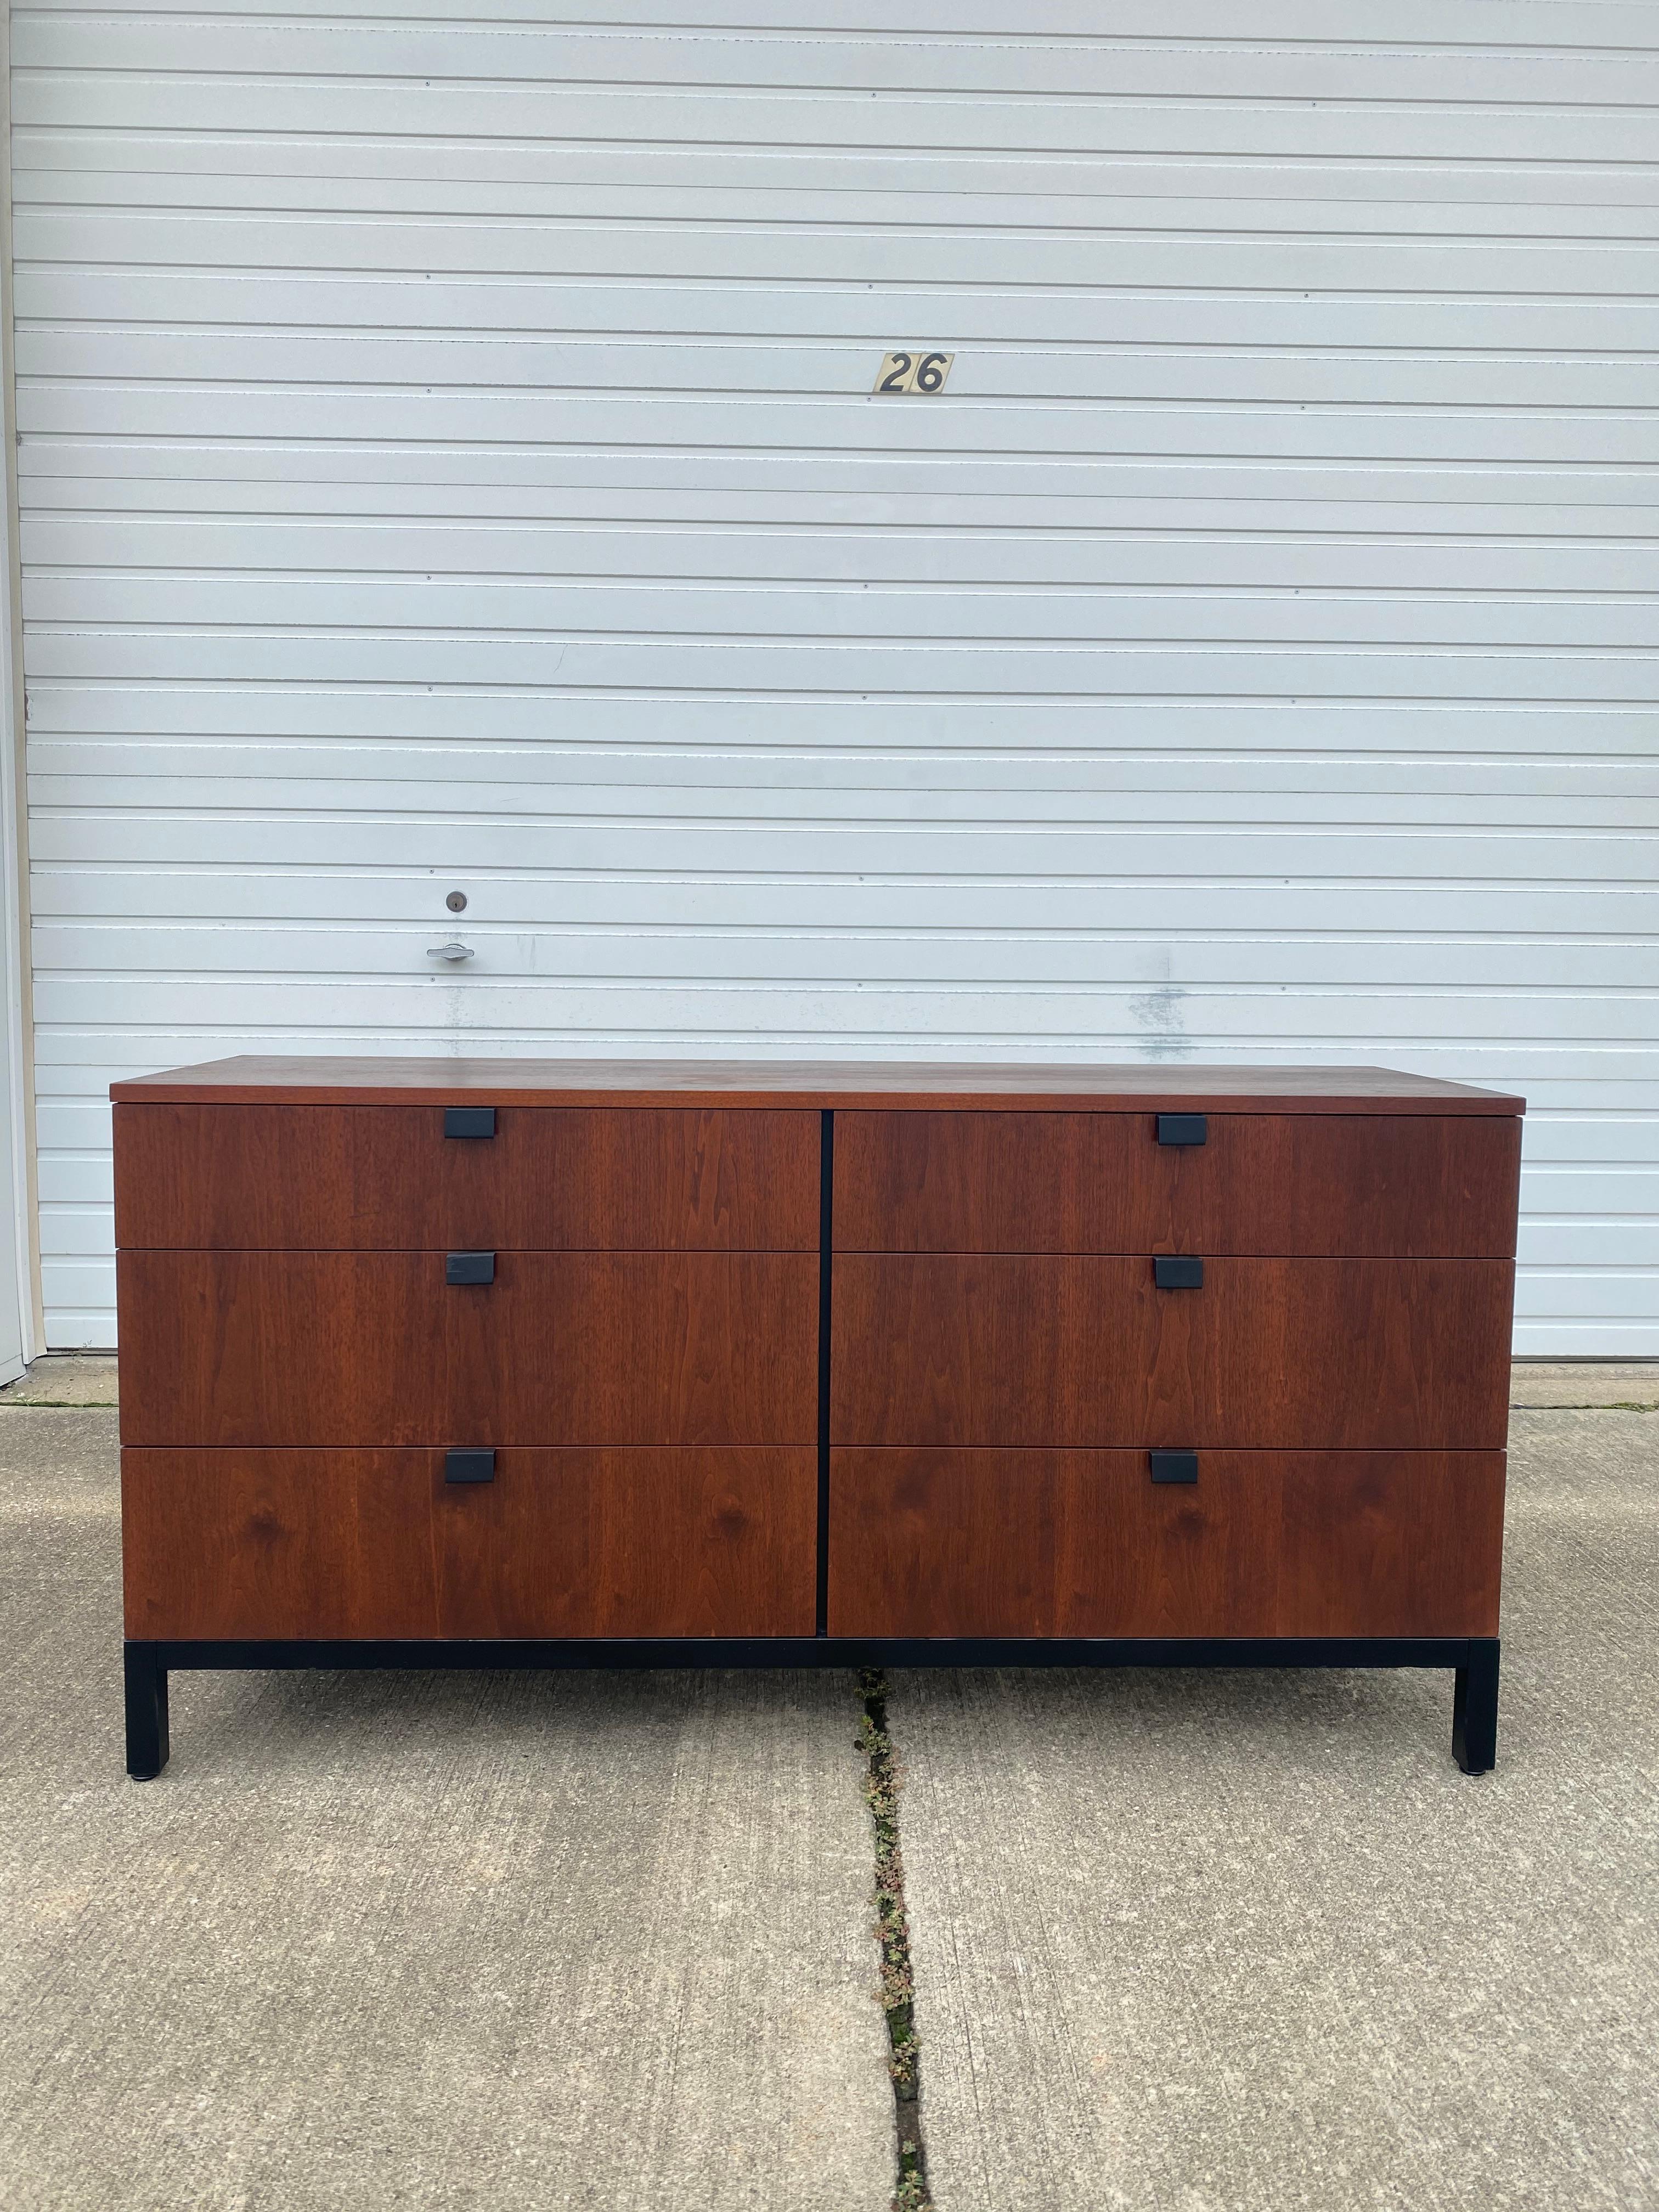 A Modern tallboy dresser designed by Milo Baughman for Directional from the Gallery I Collection, circa 1963 has been partially refinished to show off its beautiful walnut wood and new black lacquer on its handles and legs. This lowboy dresser has 6